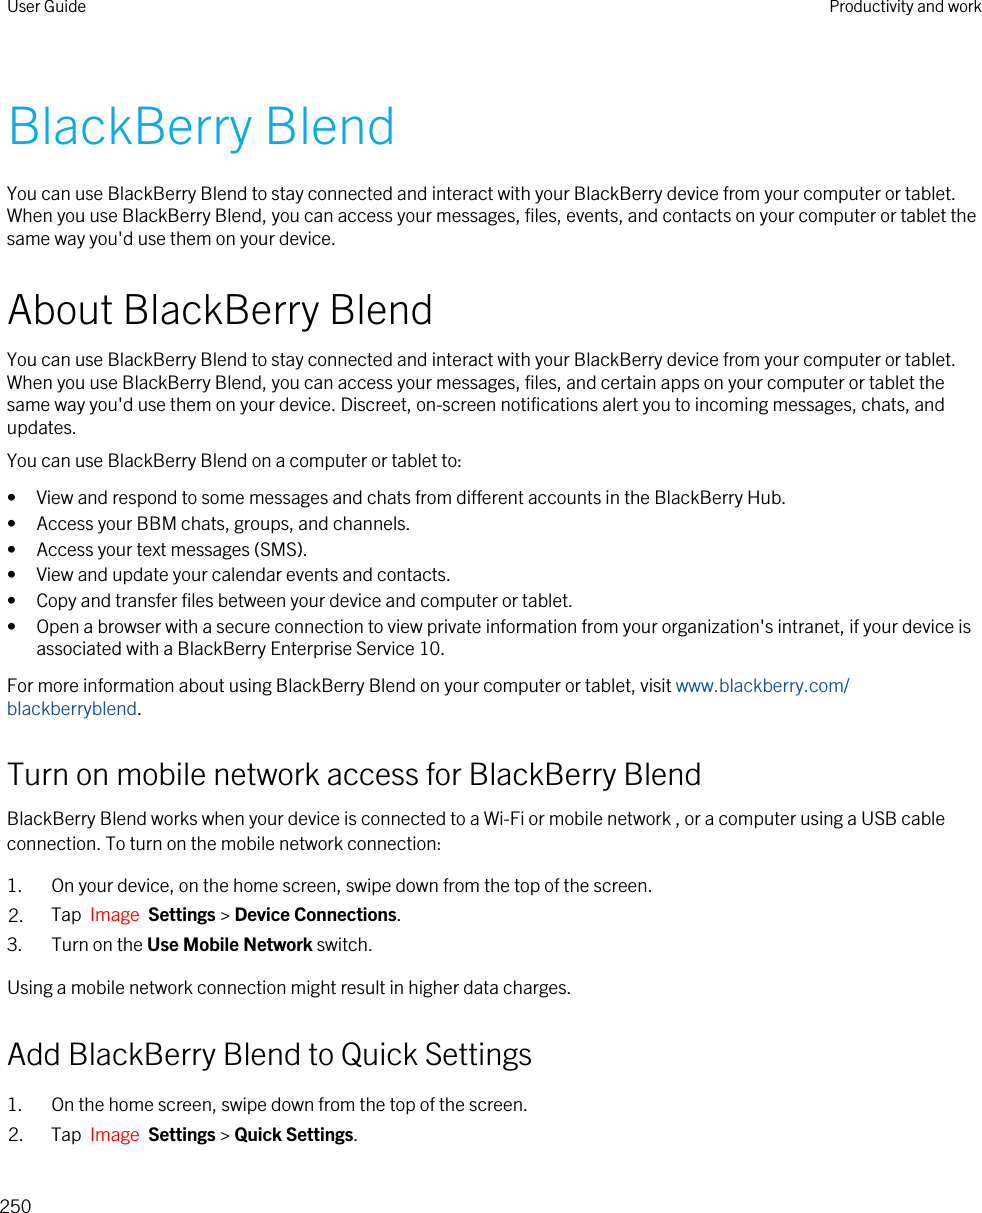 BlackBerry BlendYou can use BlackBerry Blend to stay connected and interact with your BlackBerry device from your computer or tablet. When you use BlackBerry Blend, you can access your messages, files, events, and contacts on your computer or tablet the same way you&apos;d use them on your device.About BlackBerry BlendYou can use BlackBerry Blend to stay connected and interact with your BlackBerry device from your computer or tablet. When you use BlackBerry Blend, you can access your messages, files, and certain apps on your computer or tablet the same way you&apos;d use them on your device. Discreet, on-screen notifications alert you to incoming messages, chats, and updates.You can use BlackBerry Blend on a computer or tablet to:• View and respond to some messages and chats from different accounts in the BlackBerry Hub.• Access your BBM chats, groups, and channels.• Access your text messages (SMS).• View and update your calendar events and contacts.• Copy and transfer files between your device and computer or tablet.• Open a browser with a secure connection to view private information from your organization&apos;s intranet, if your device is associated with a BlackBerry Enterprise Service 10.For more information about using BlackBerry Blend on your computer or tablet, visit www.blackberry.com/blackberryblend.Turn on mobile network access for BlackBerry BlendBlackBerry Blend works when your device is connected to a Wi-Fi or mobile network , or a computer using a USB cable connection. To turn on the mobile network connection:1. On your device, on the home screen, swipe down from the top of the screen.2. Tap  Image  Settings &gt; Device Connections.3. Turn on the Use Mobile Network switch.Using a mobile network connection might result in higher data charges.Add BlackBerry Blend to Quick Settings1. On the home screen, swipe down from the top of the screen.2. Tap  Image  Settings &gt; Quick Settings.User Guide Productivity and work250